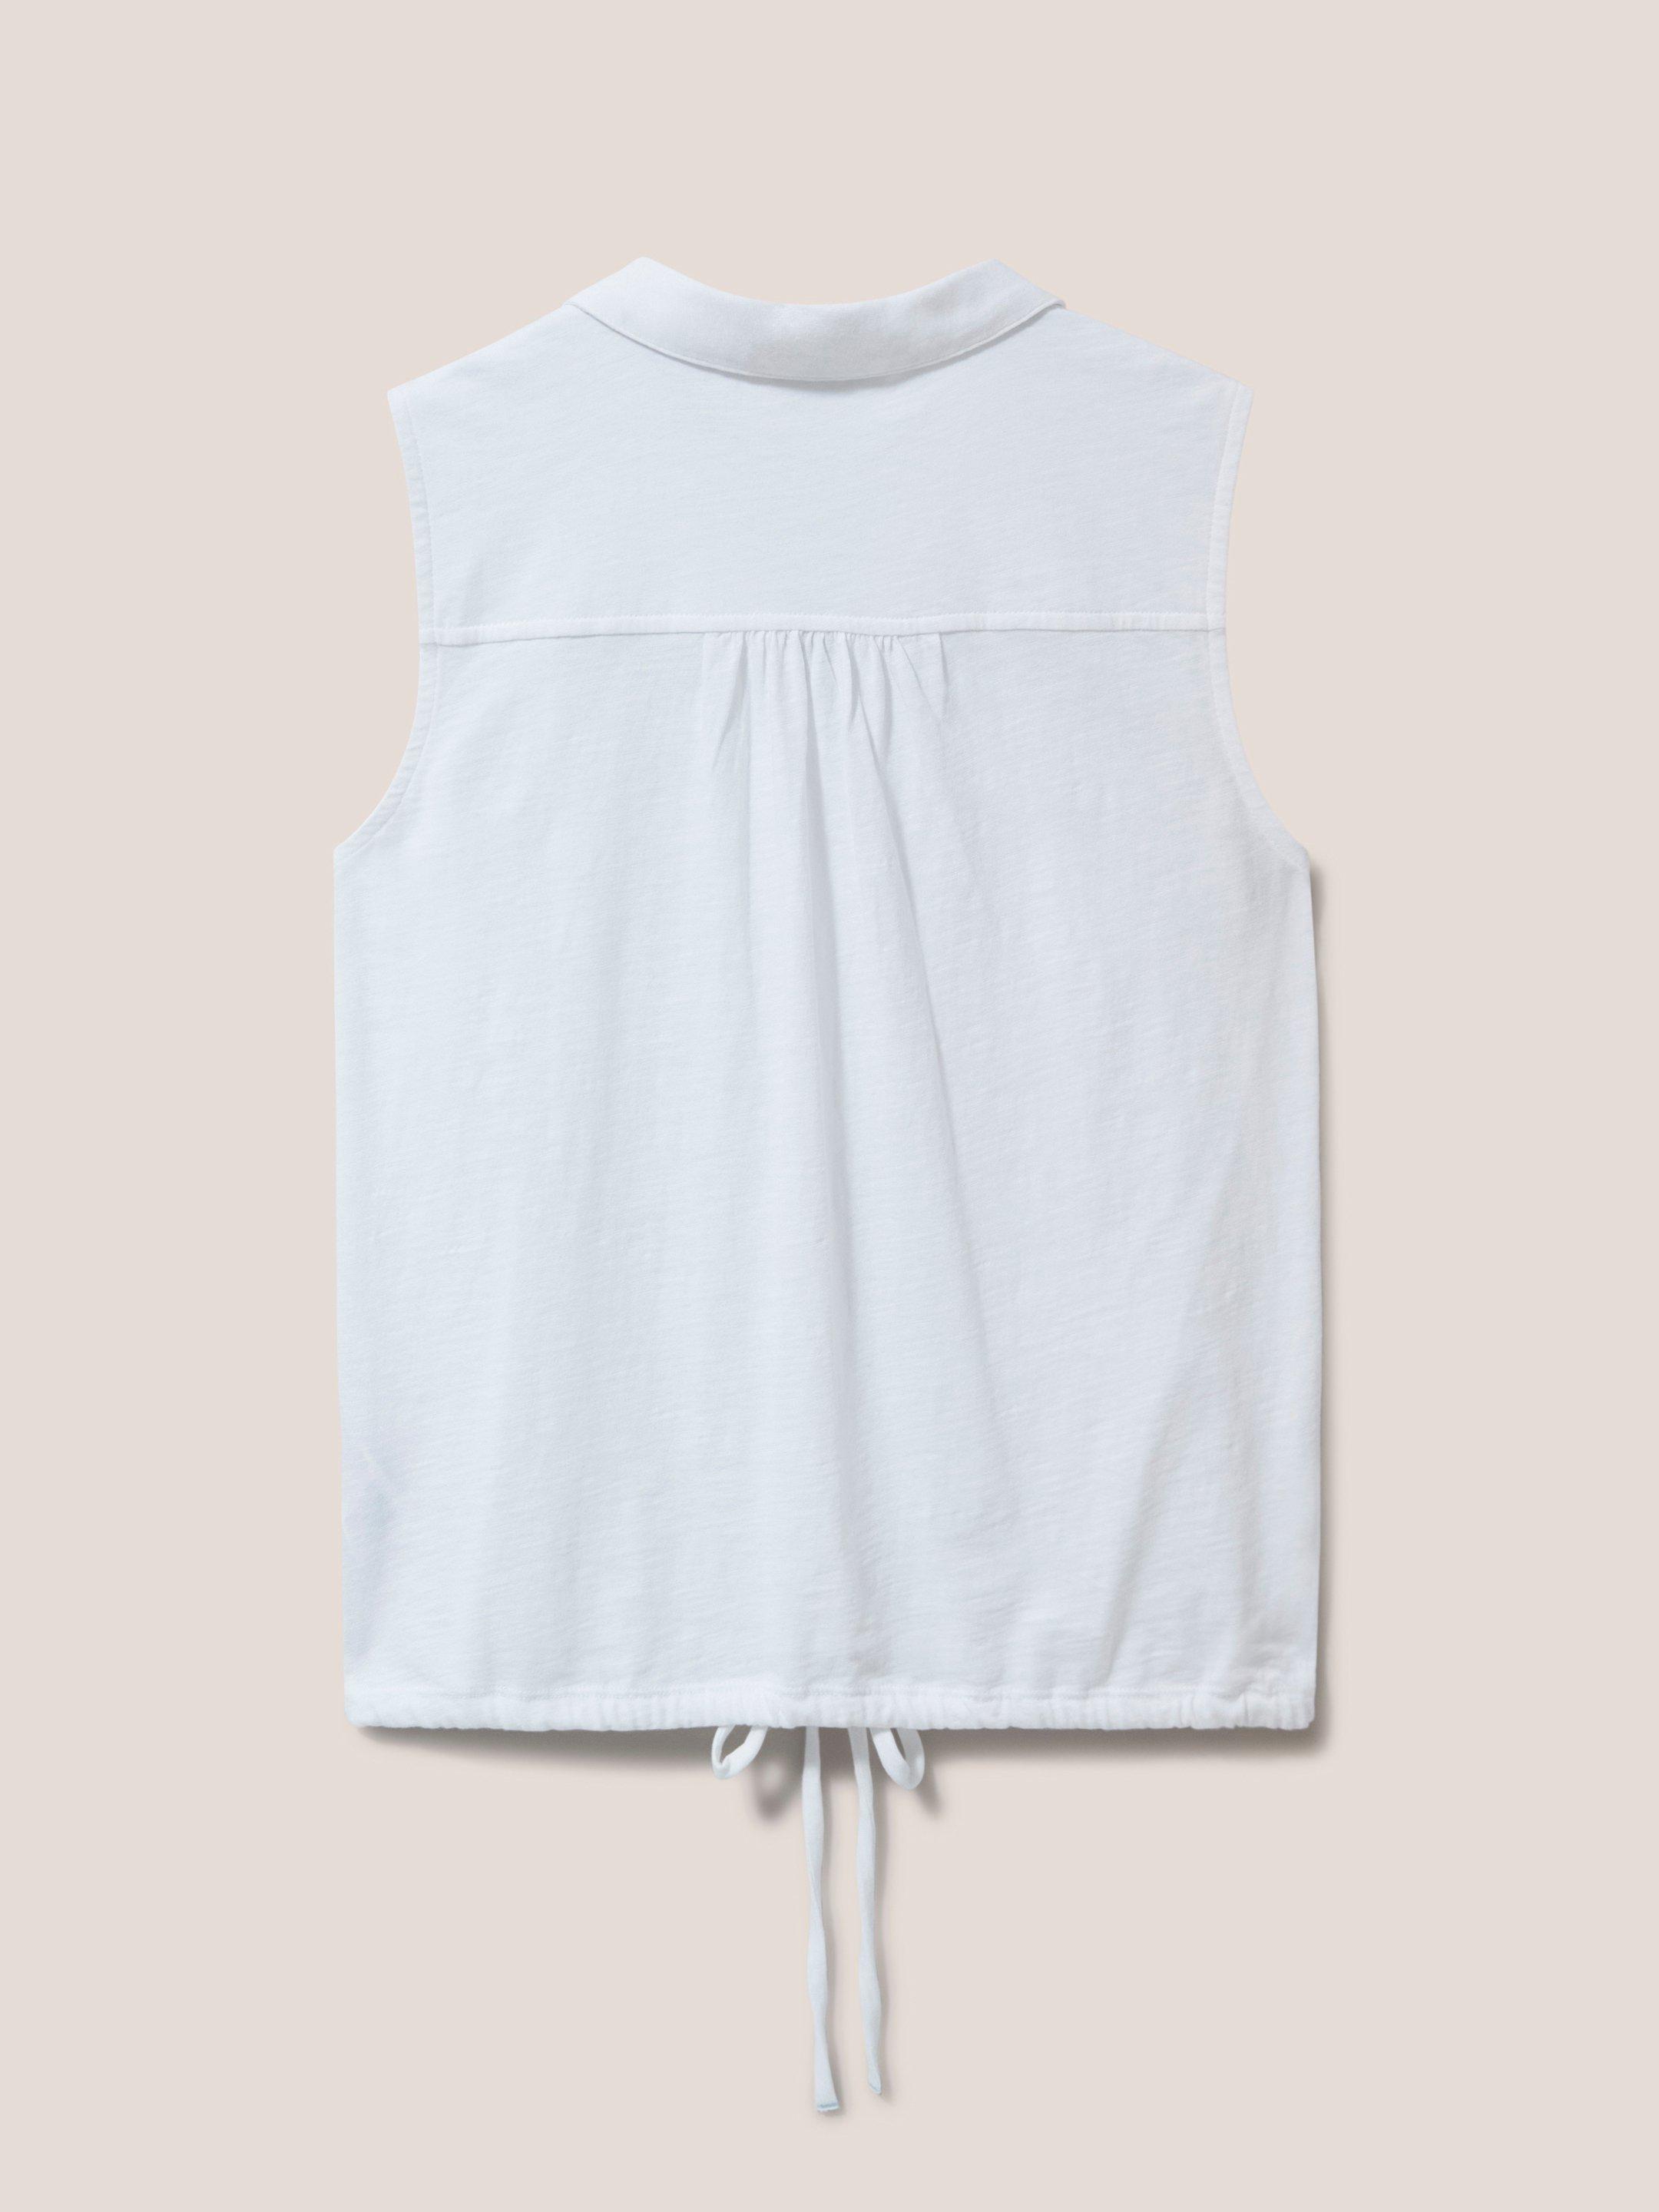 Flowing Grasses Sleeveless Jersey Shirt in BRIL WHITE - FLAT BACK